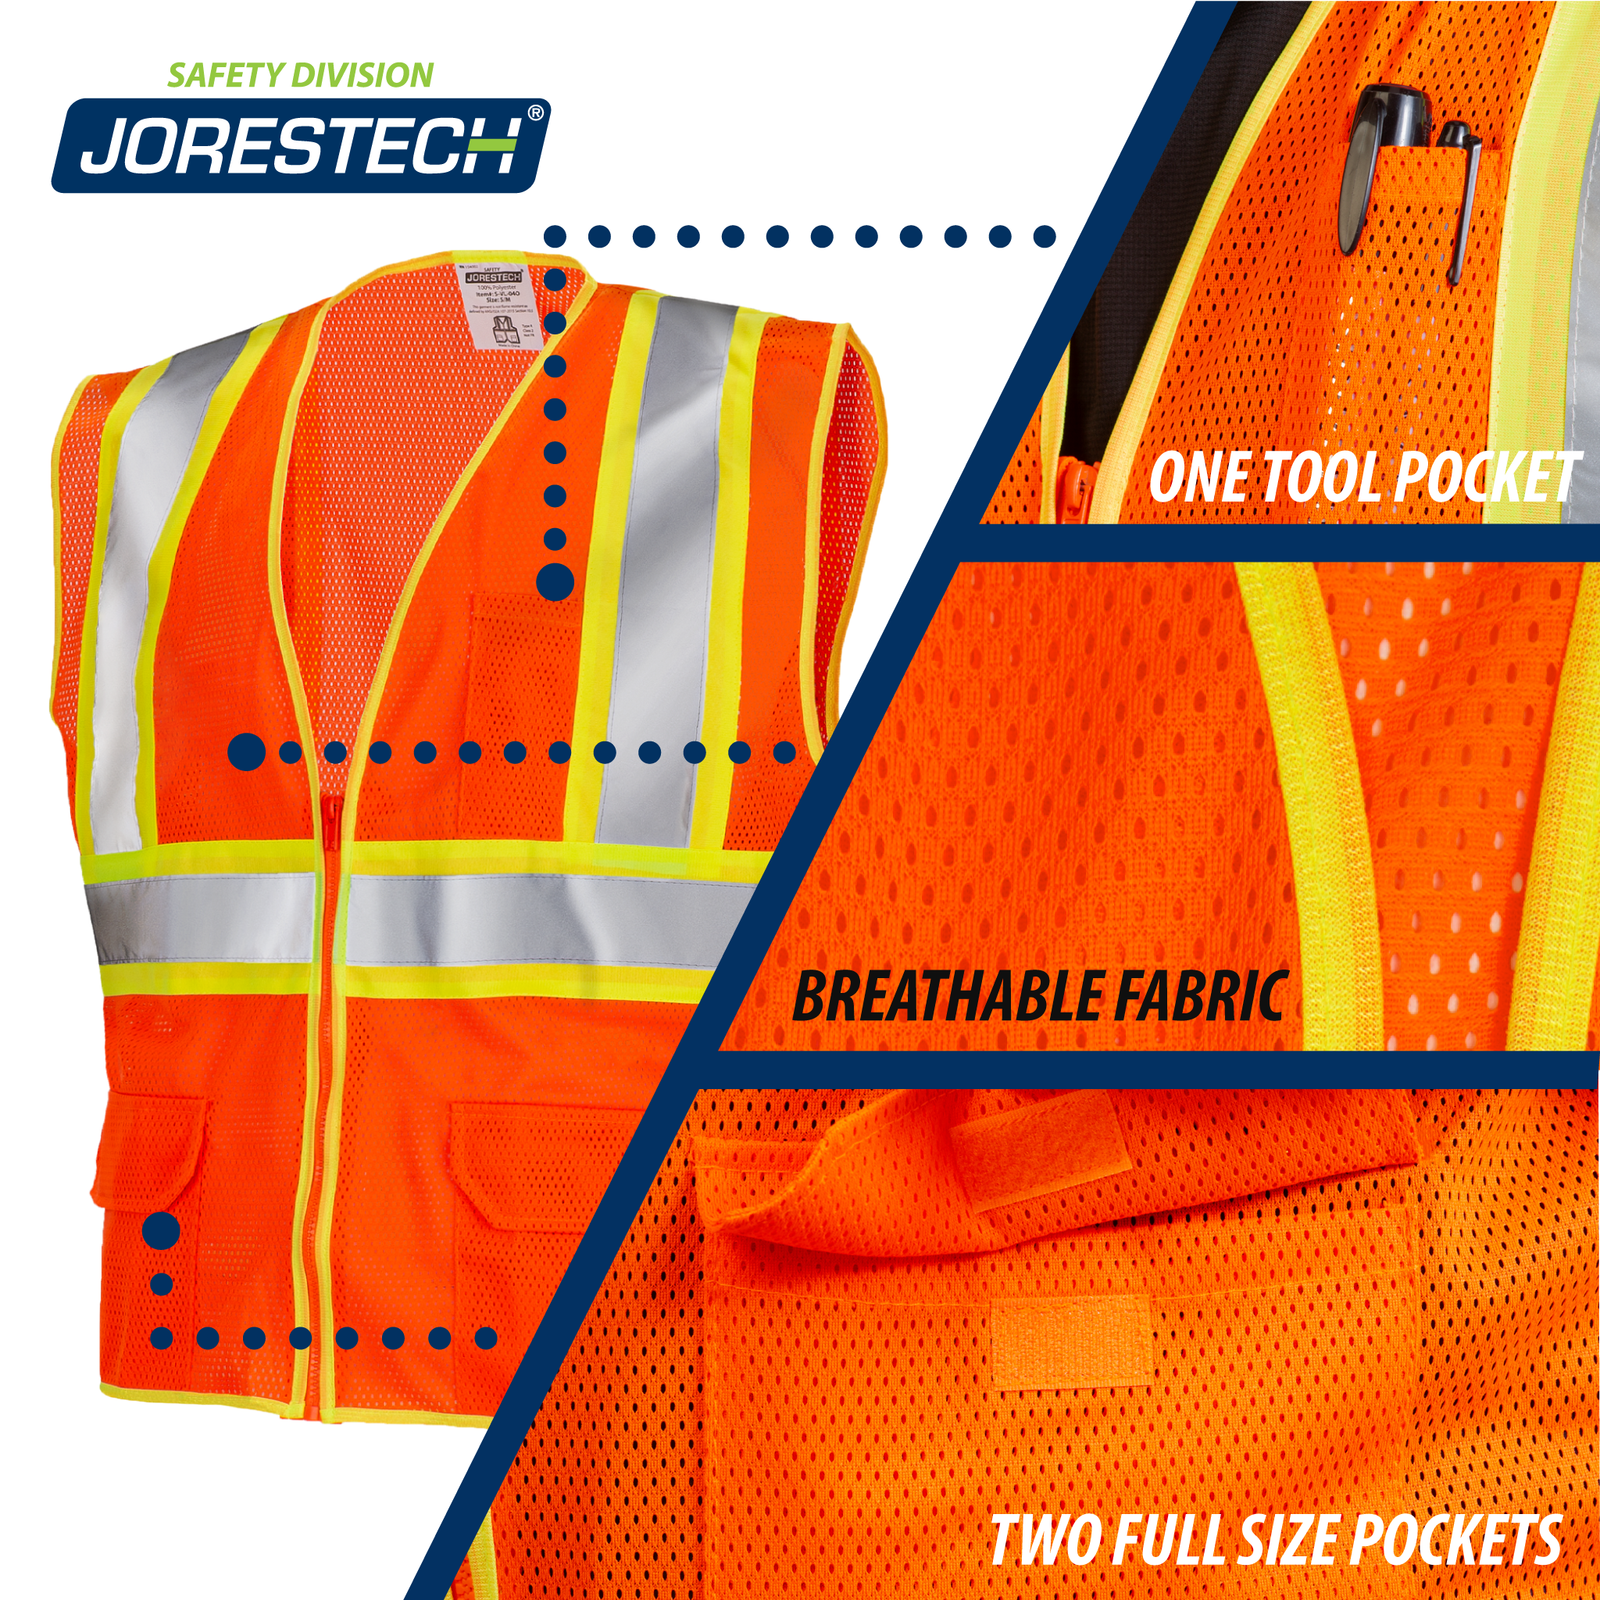 Features the orange safety vest with 3 call outs: one tool pocket, breathable fabric, two full size pockets.